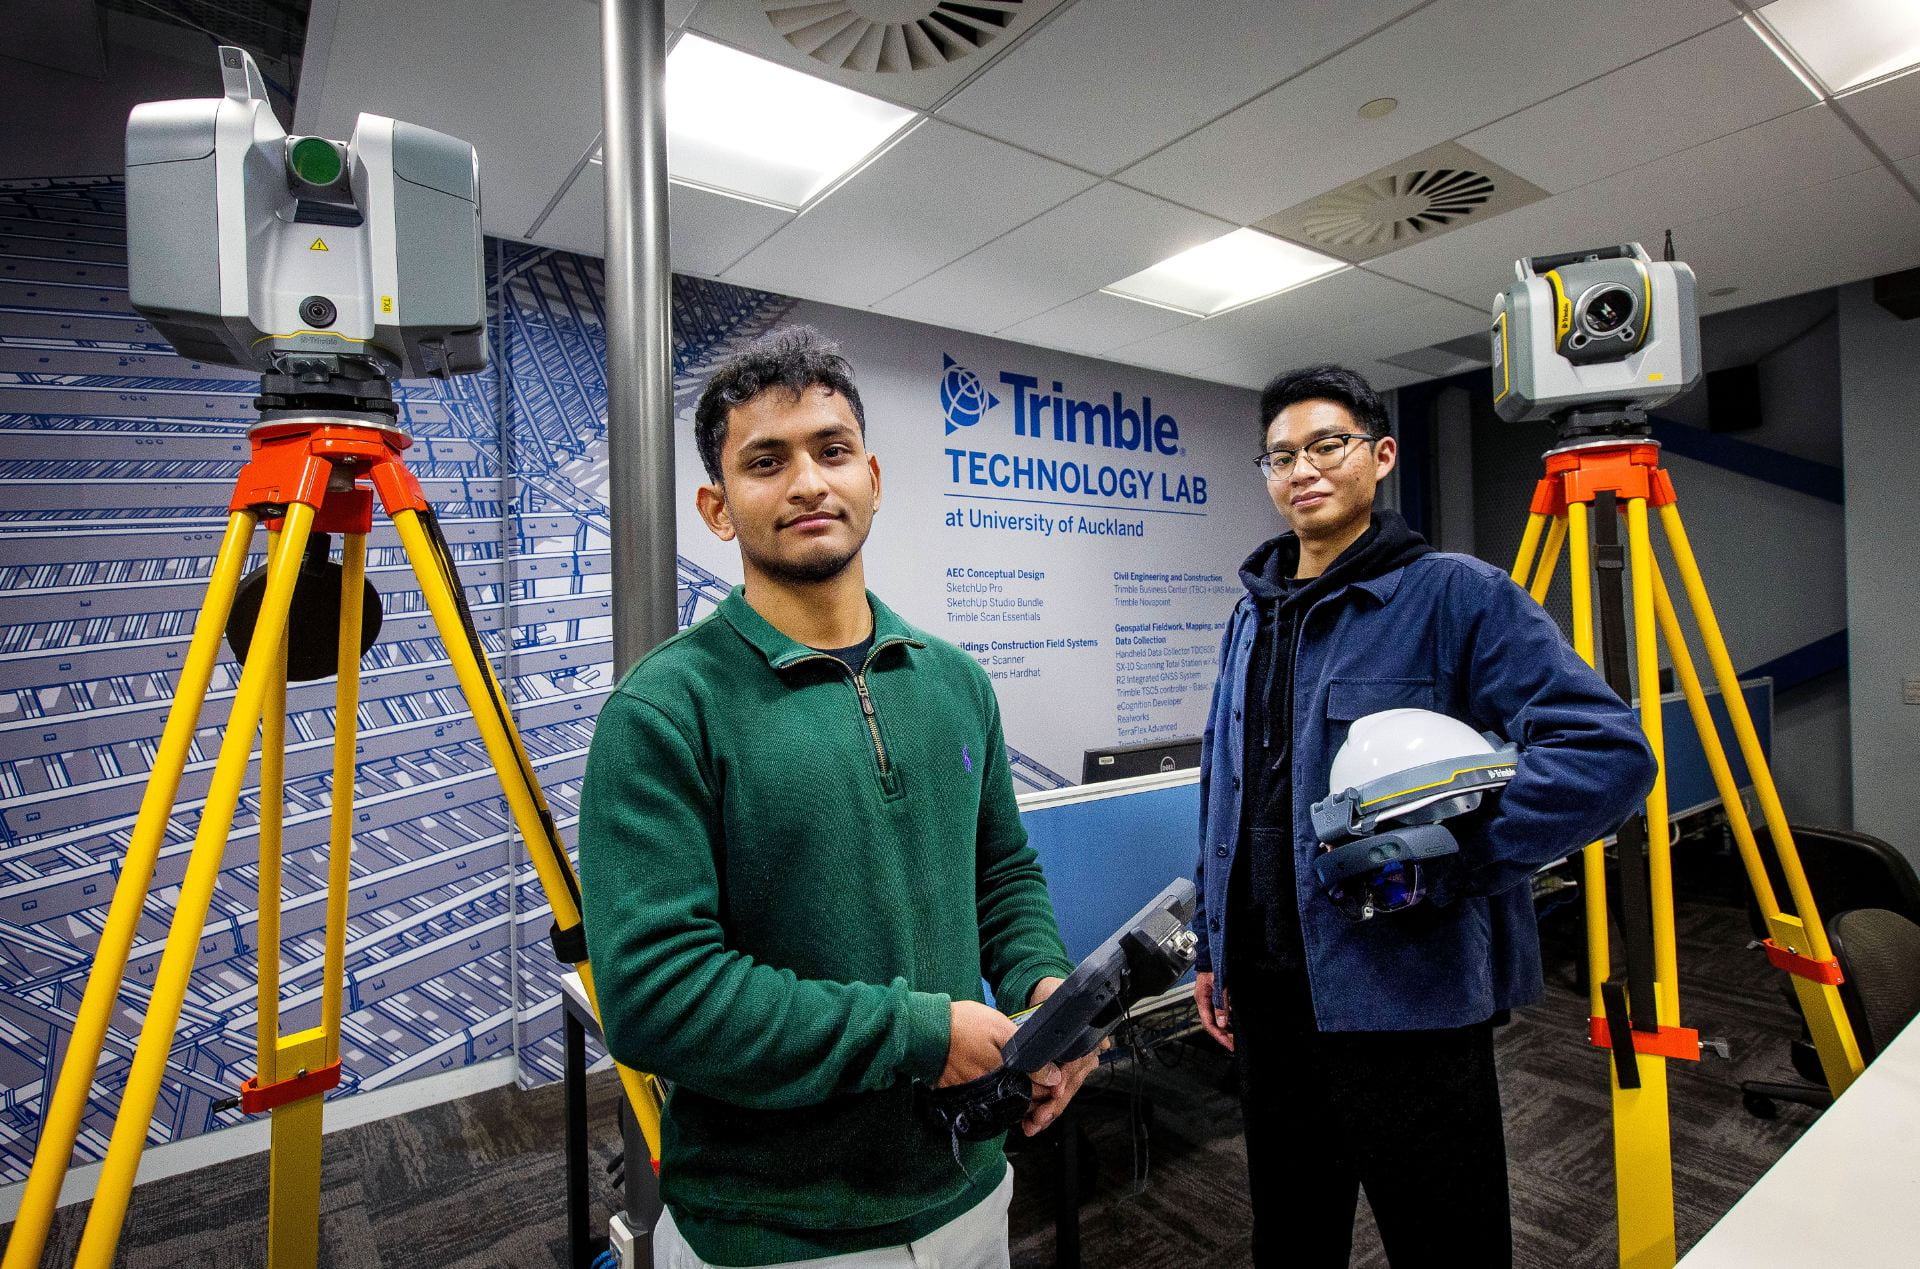 Another picture of two students amongst Trimble Technology, inside the Trimble Technology Lab.